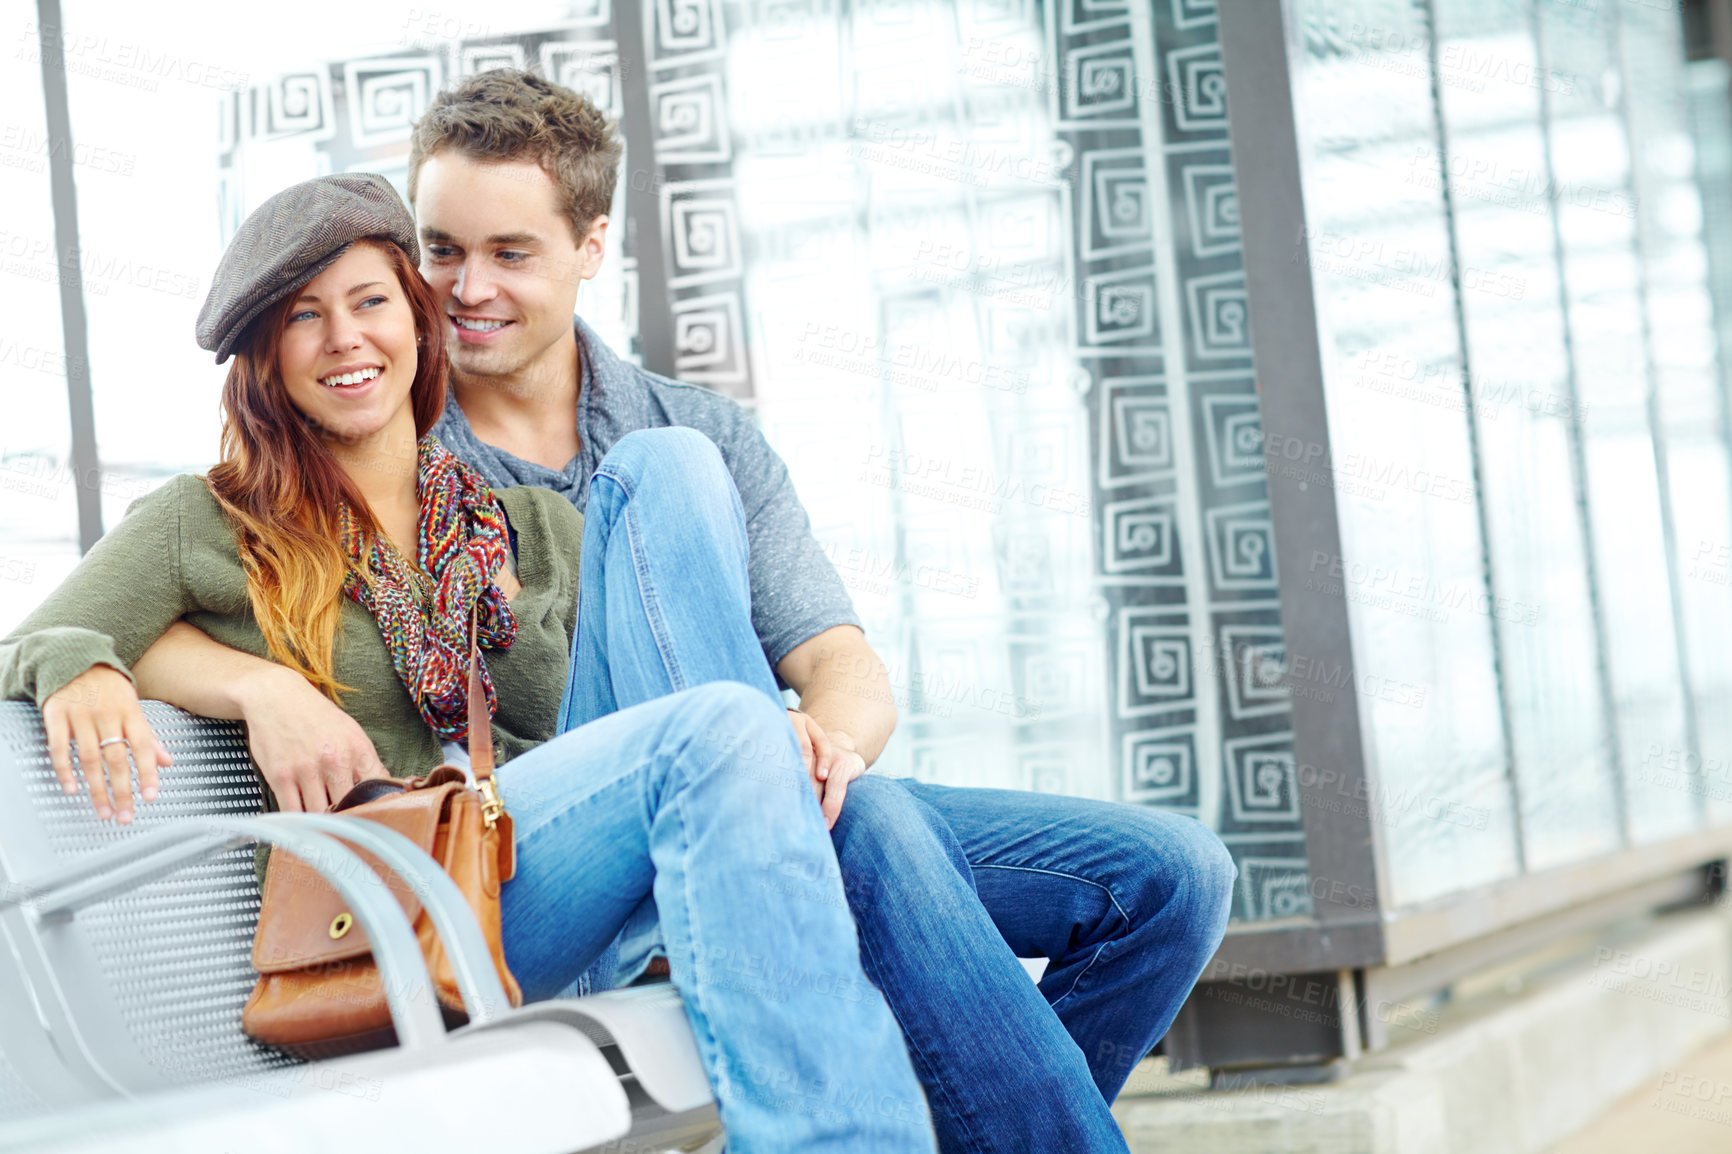 Buy stock photo Portrait of an attractive couple sitting at the train station with copyspace